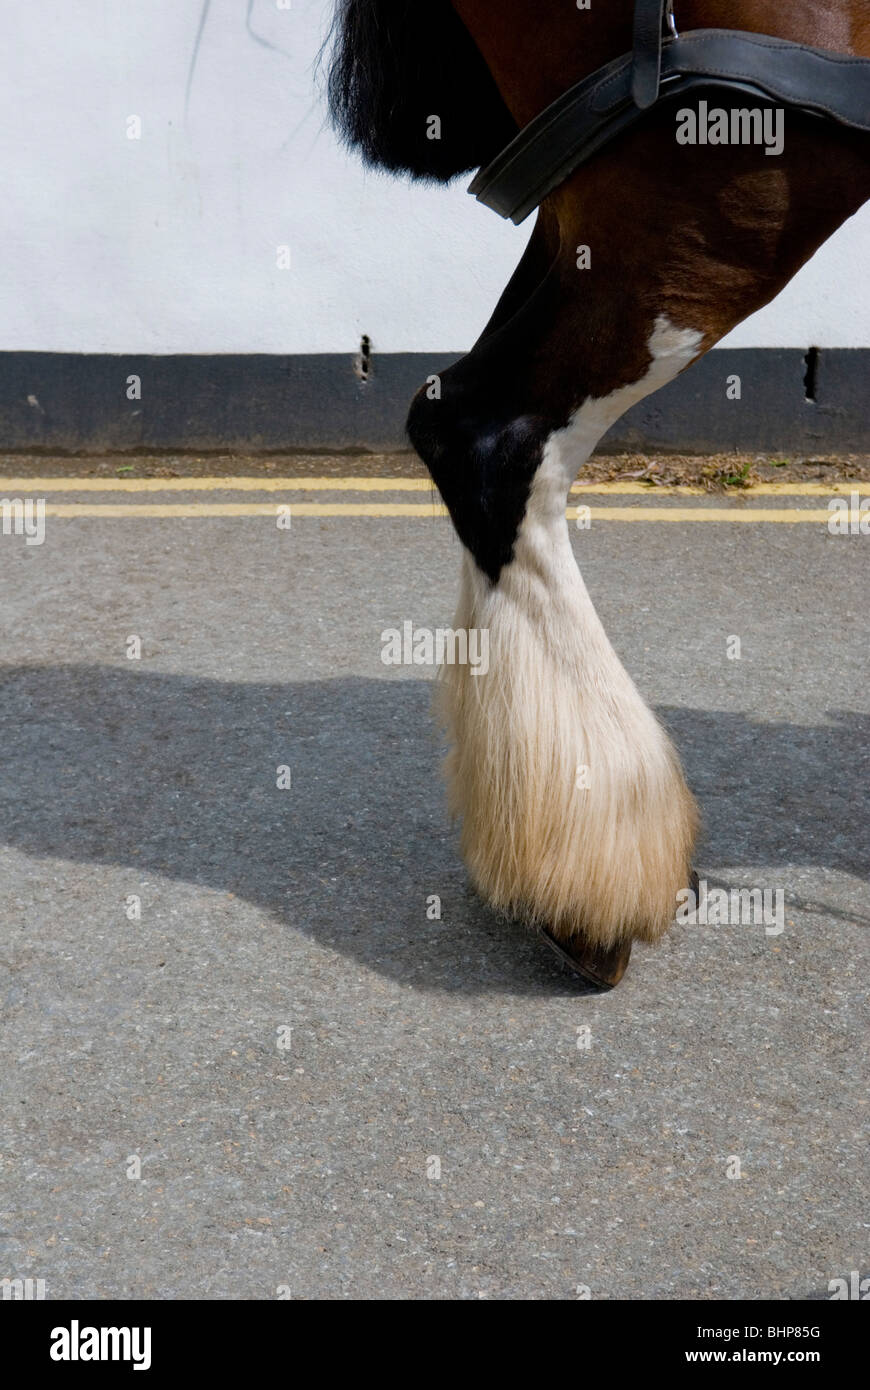 quirky detail of shire horses leg on road with double yellow lines in background Stock Photo